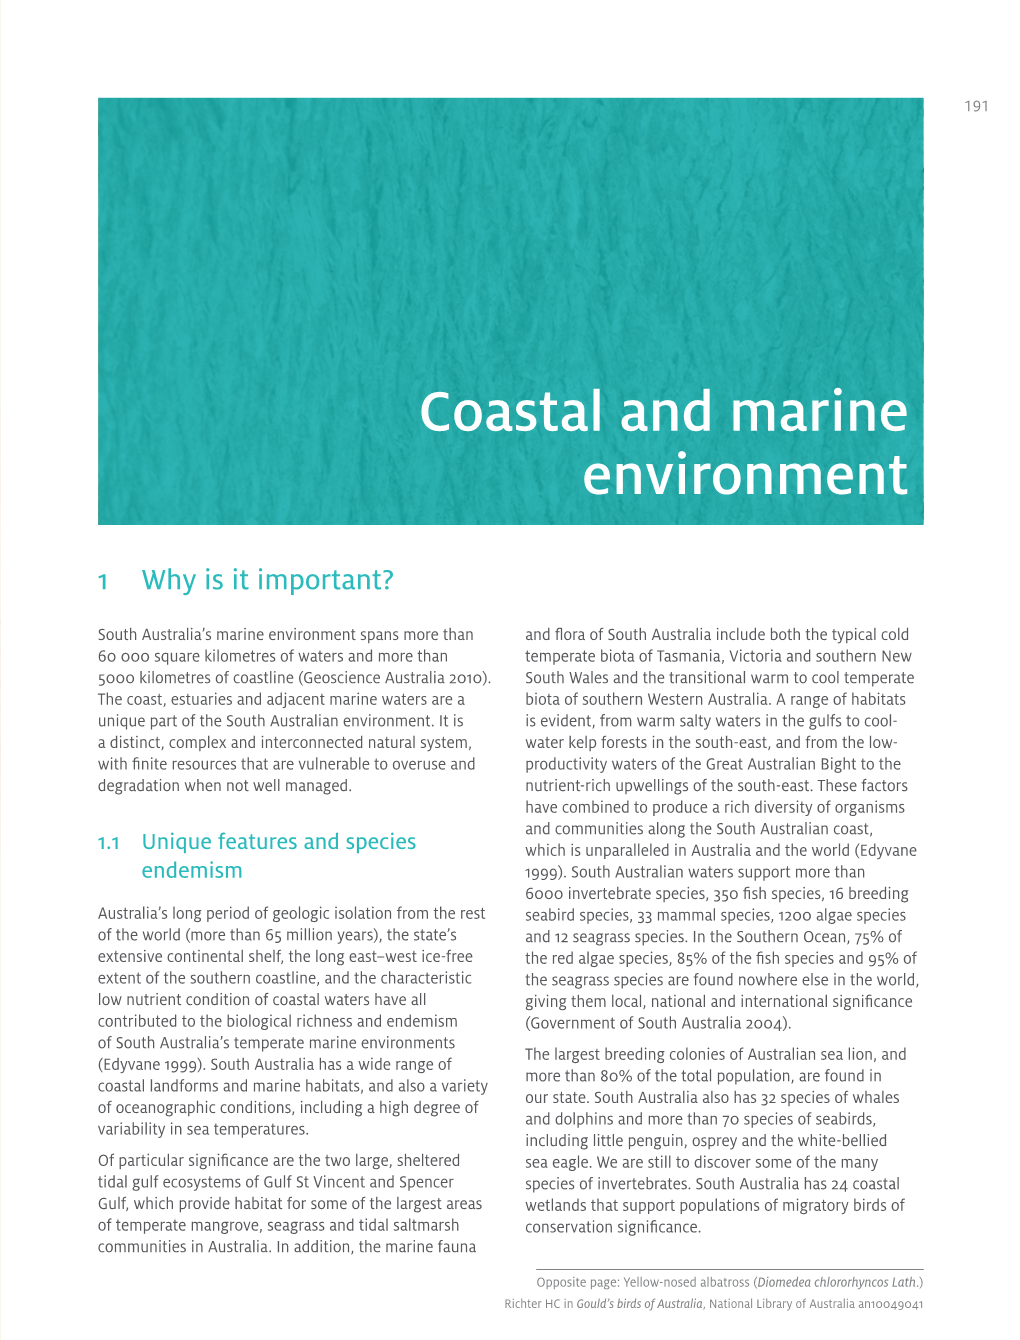 South Australia State of the Environment Report 2013 – Coastal